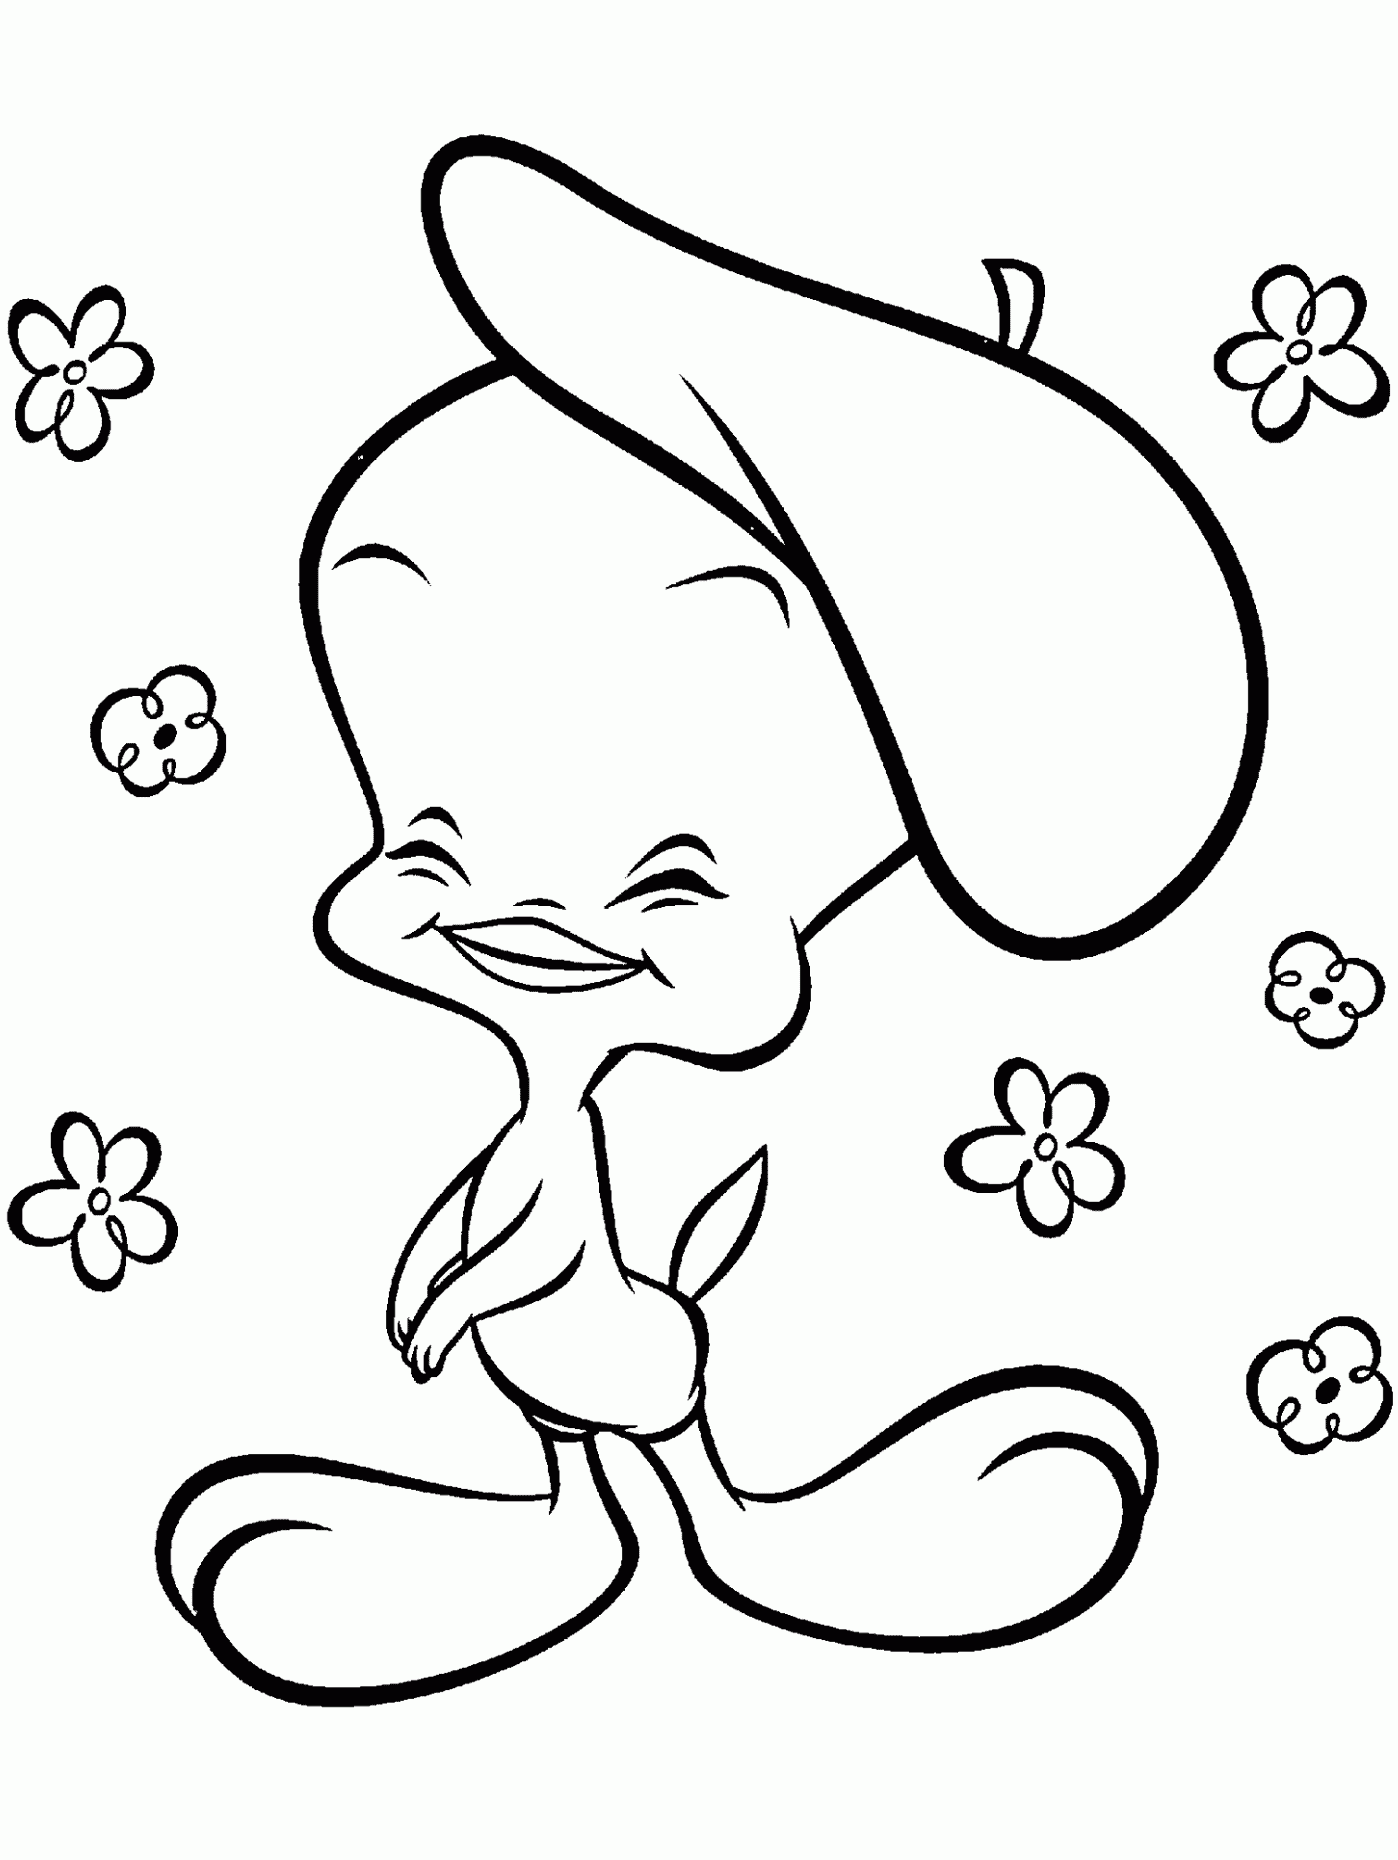 Coloring pages amazing tweety bird coloring pages free